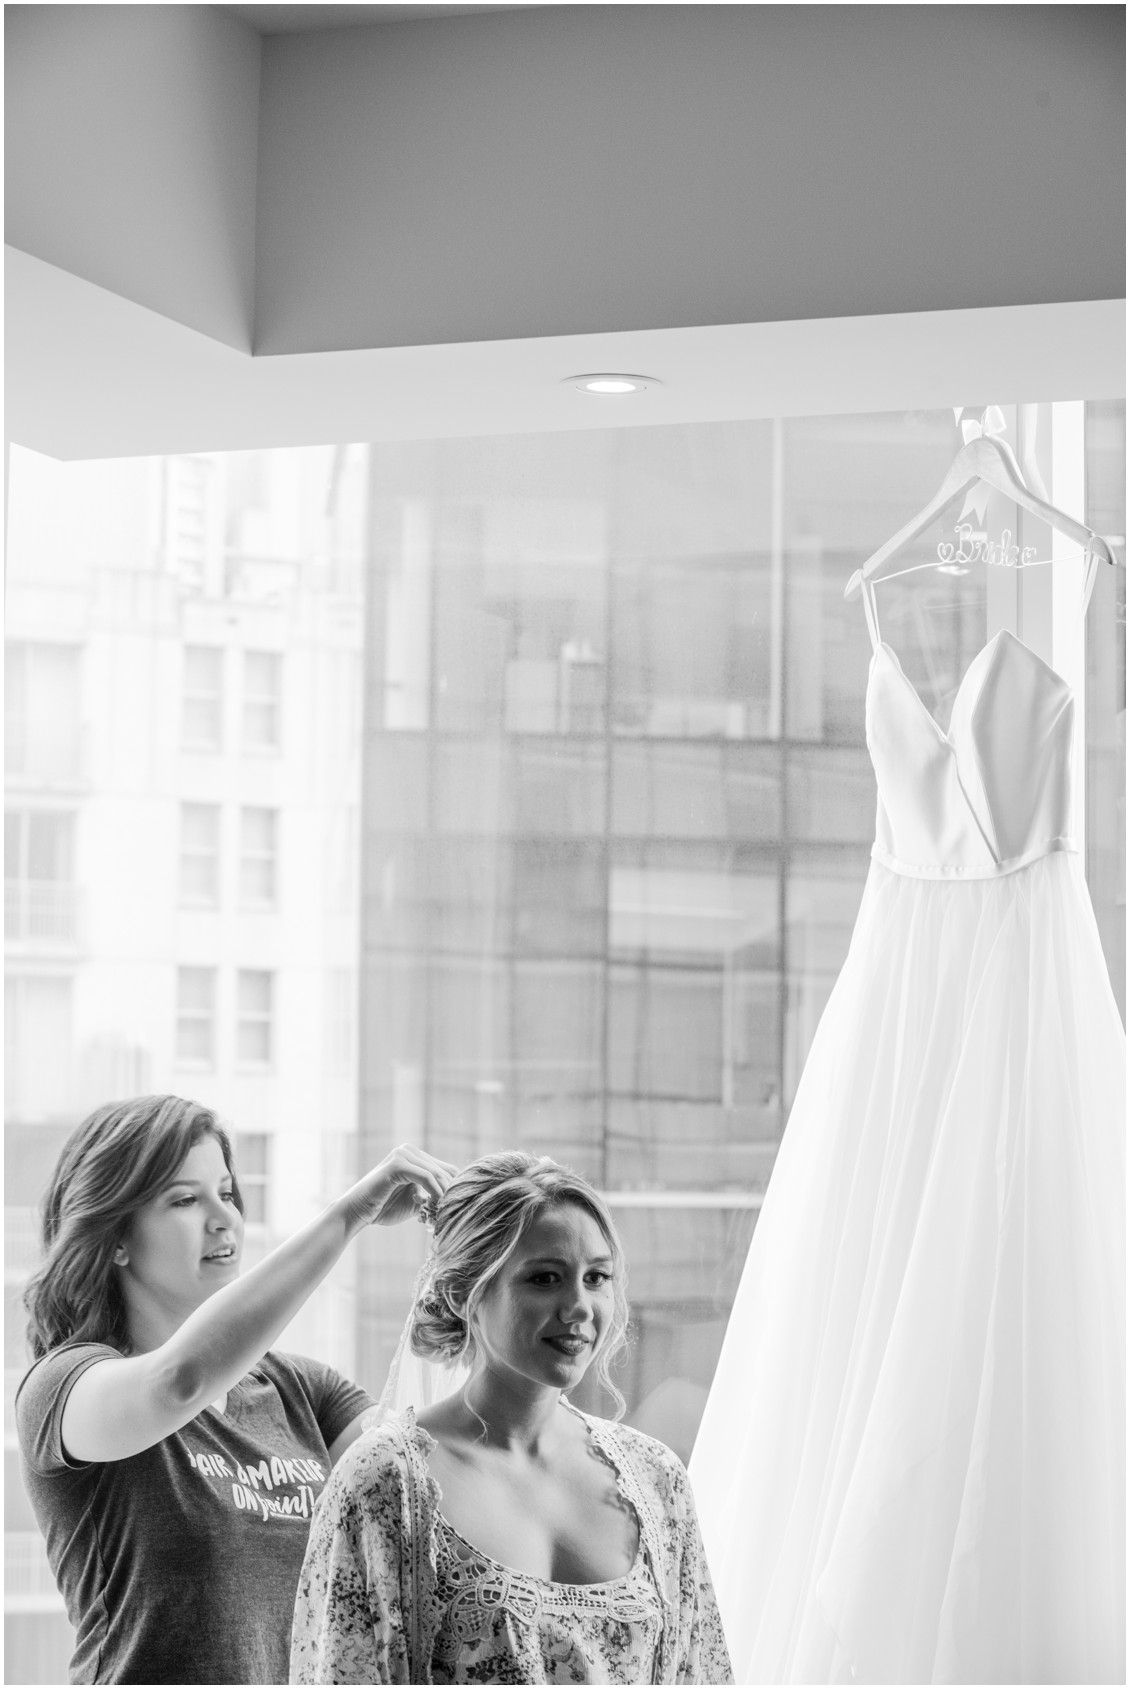 Baltimore Wedding Getting Ready at Four Seasons by Melissa Grimes-Guy Photography